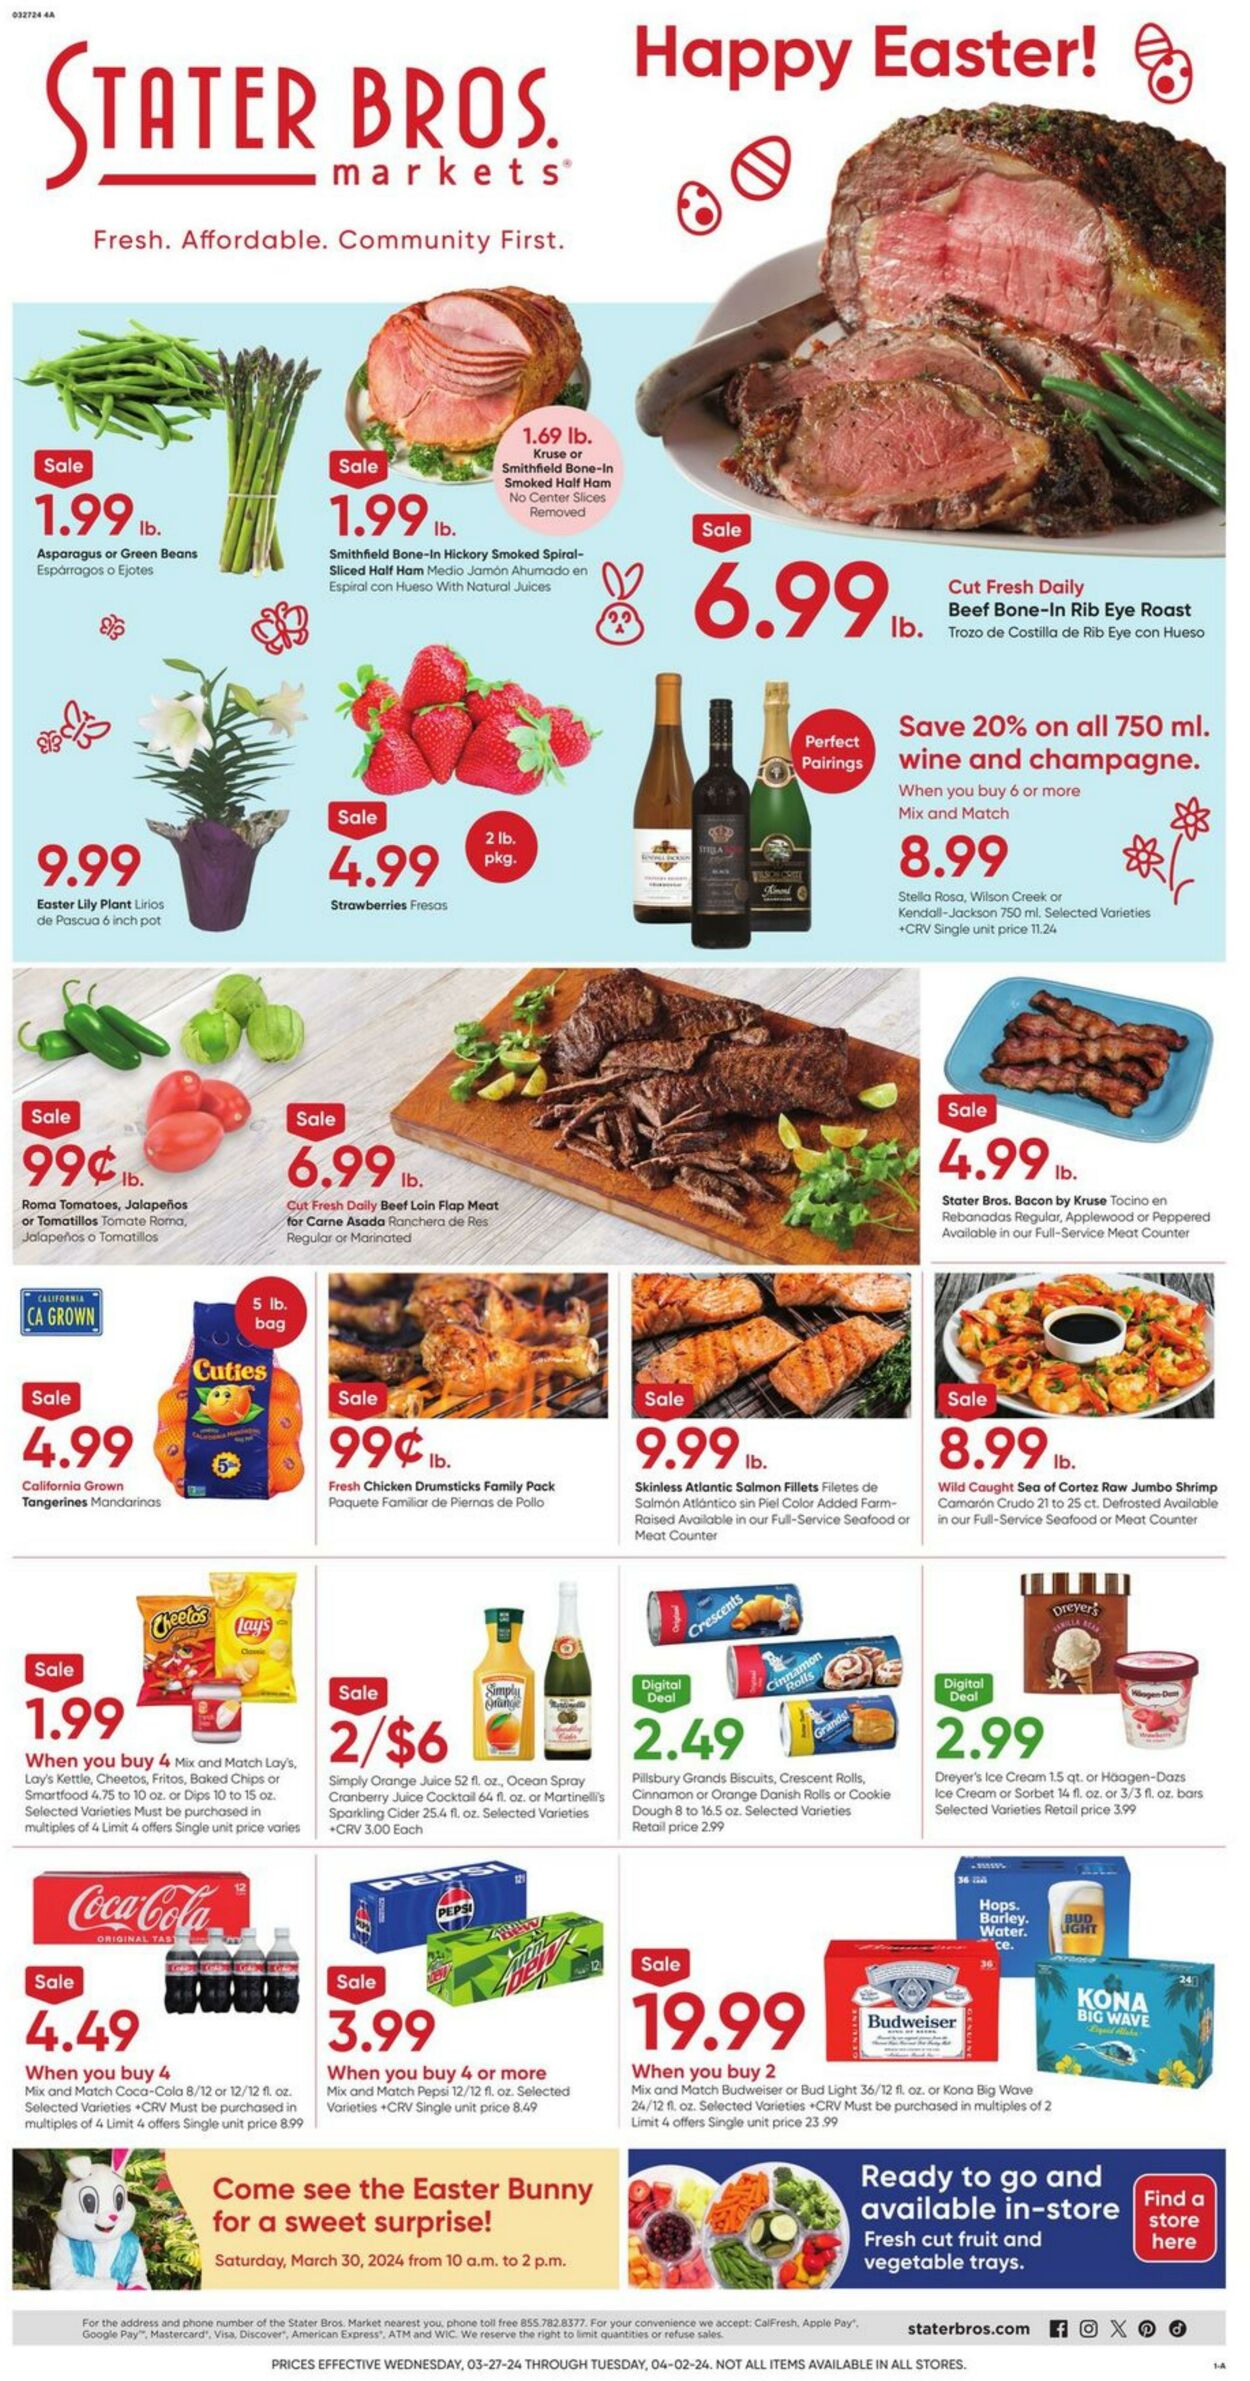 Stater Bros Promotional weekly ads